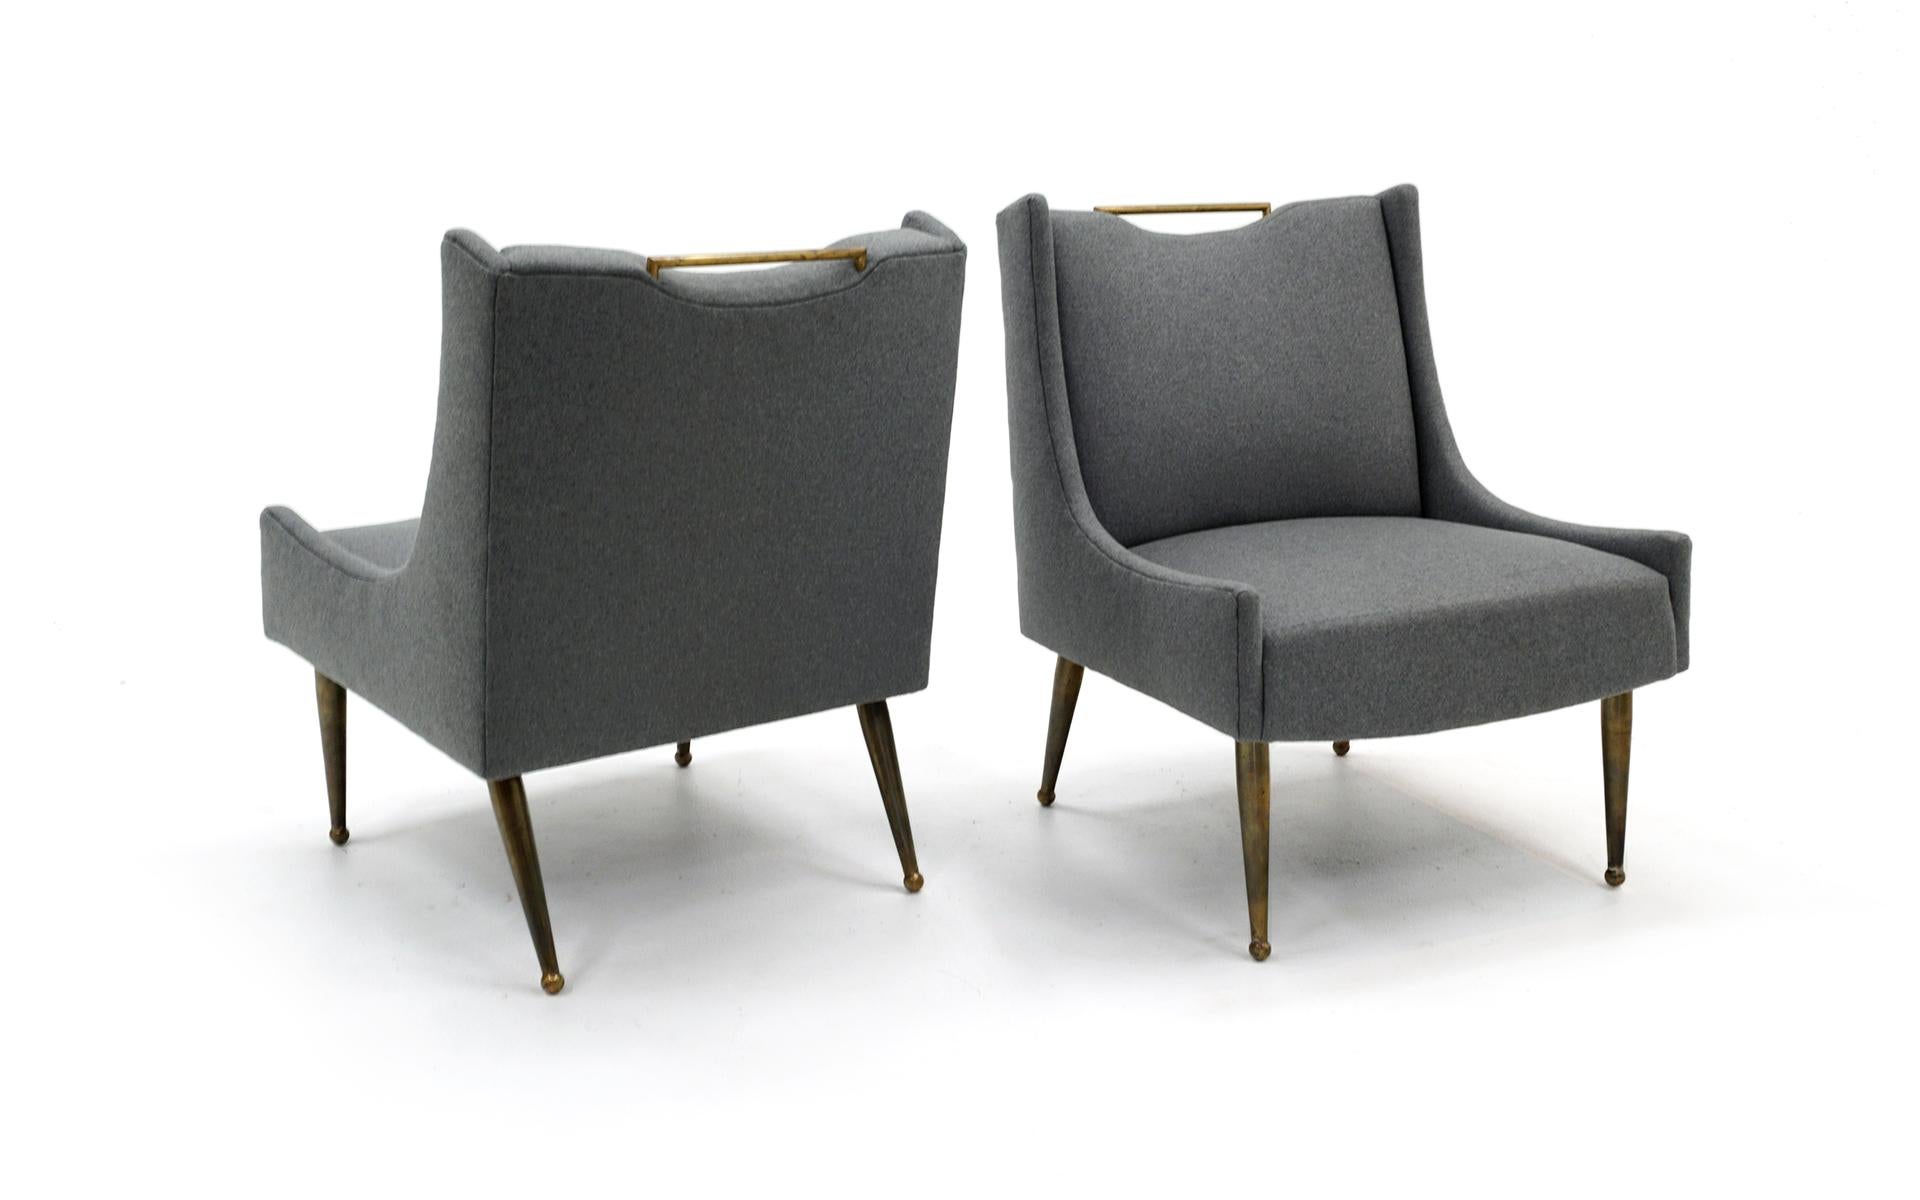 Pair of Italian Lounge Chairs, New Medium Gray Upholstery, Solid Brass Legs 3